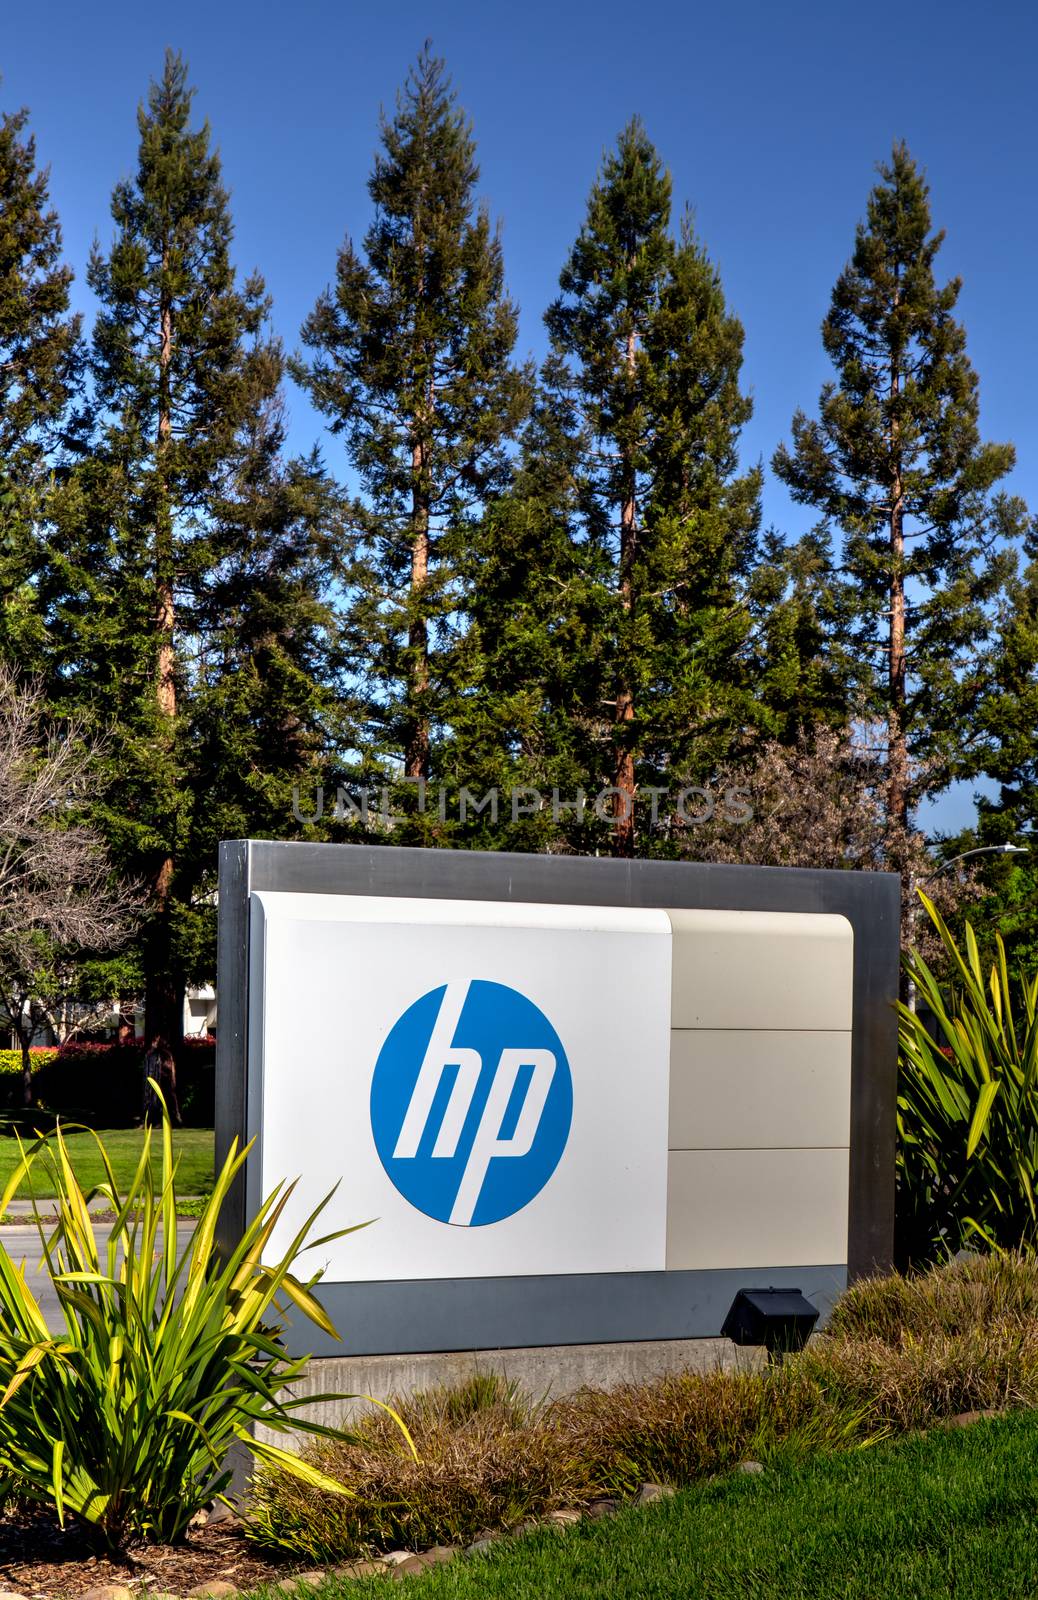 PALO ALTO, CA/USA - MARCH 16, 2014: Hewlett-Packard corporate headquarters in Silicon Valley. HP is an American multinational information technology corporation that provides hardware, software and services to consumers, businesses and government.